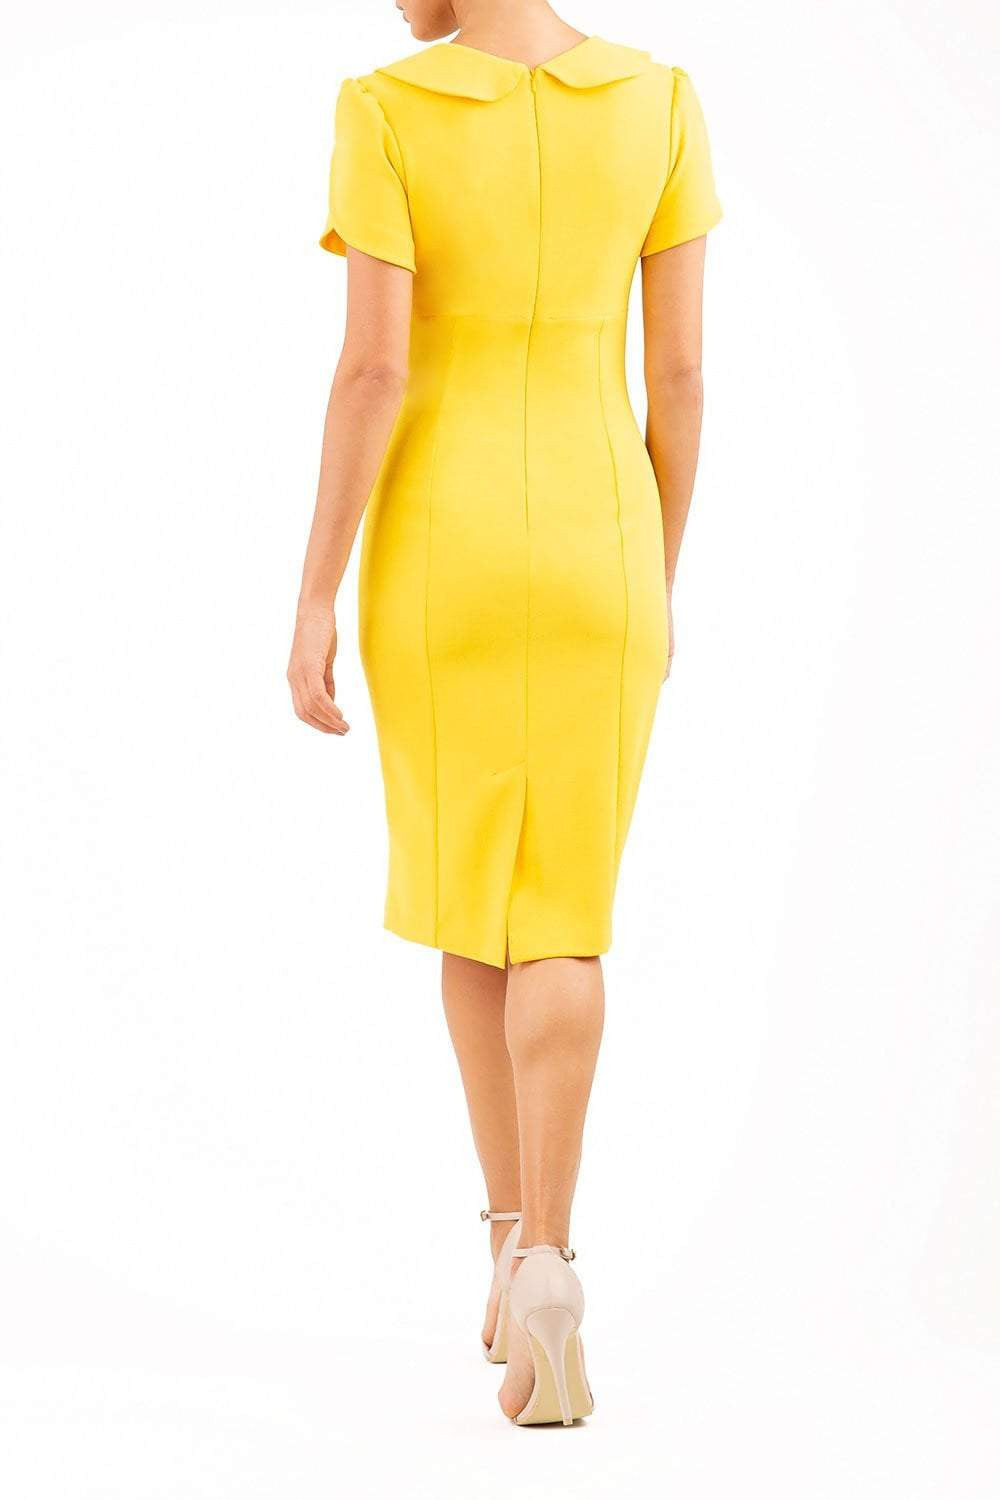 Short puffed sleeve peter pan collar button pencil dress by diva catwalk in yellow back